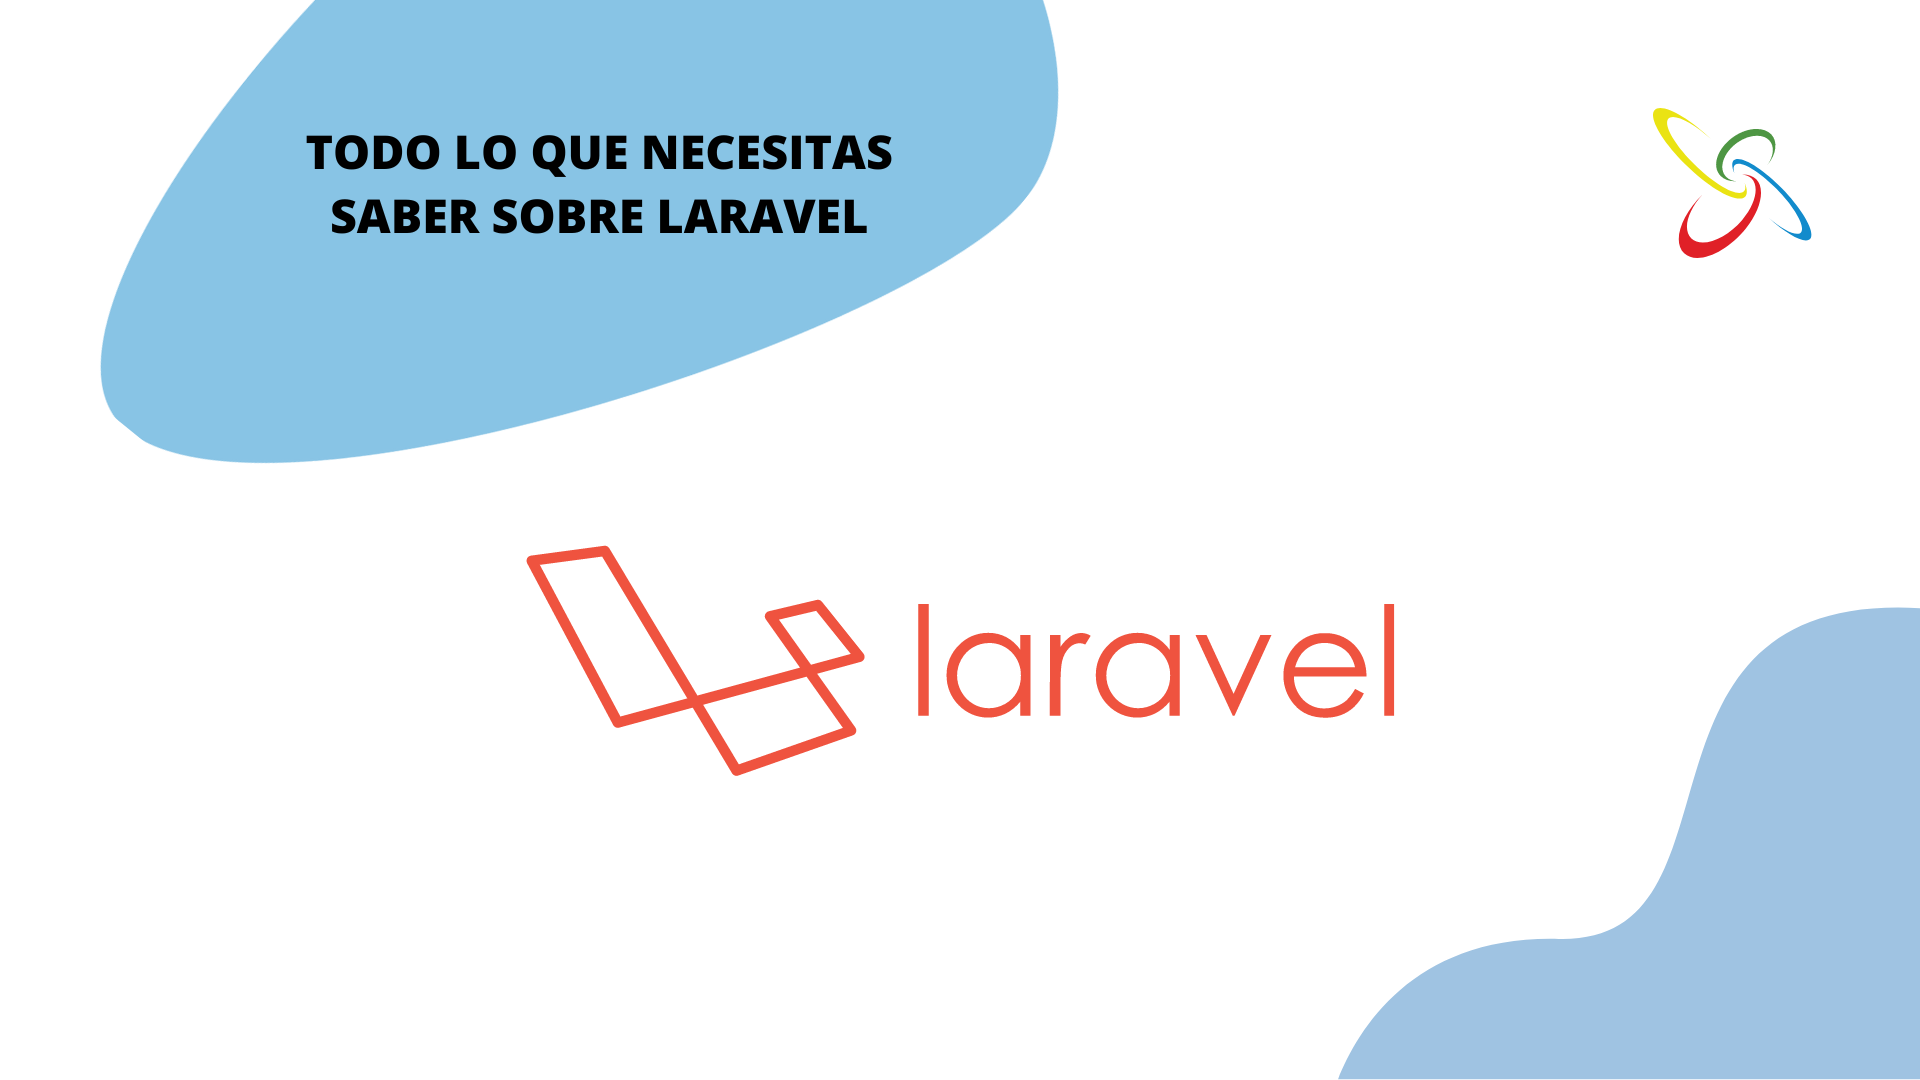 Everything you need to know about Laravel